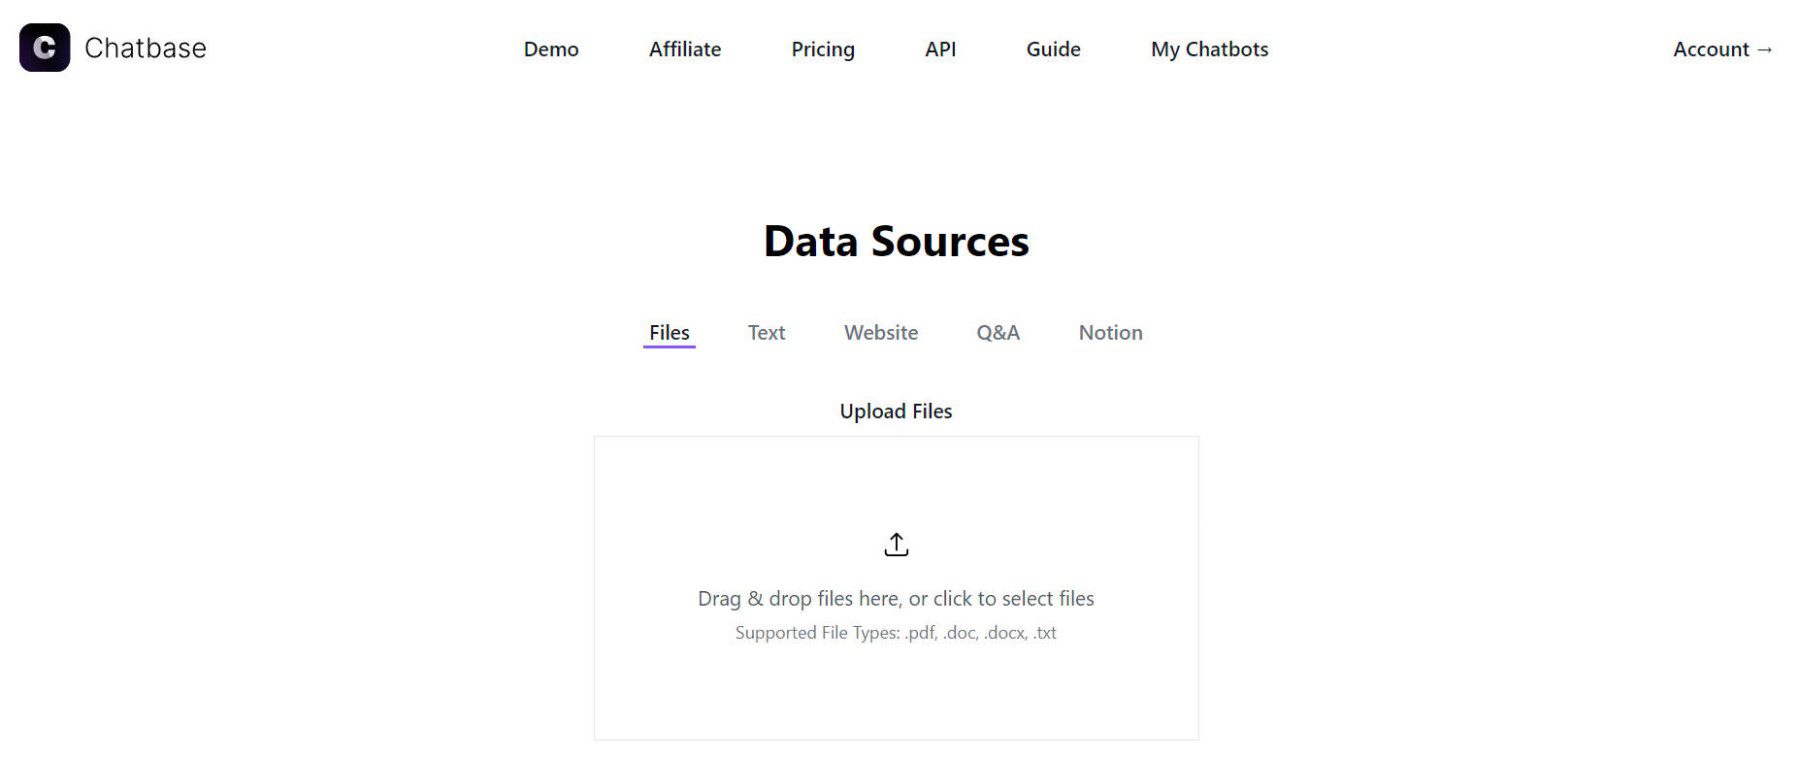 Chatbase Data Sources View